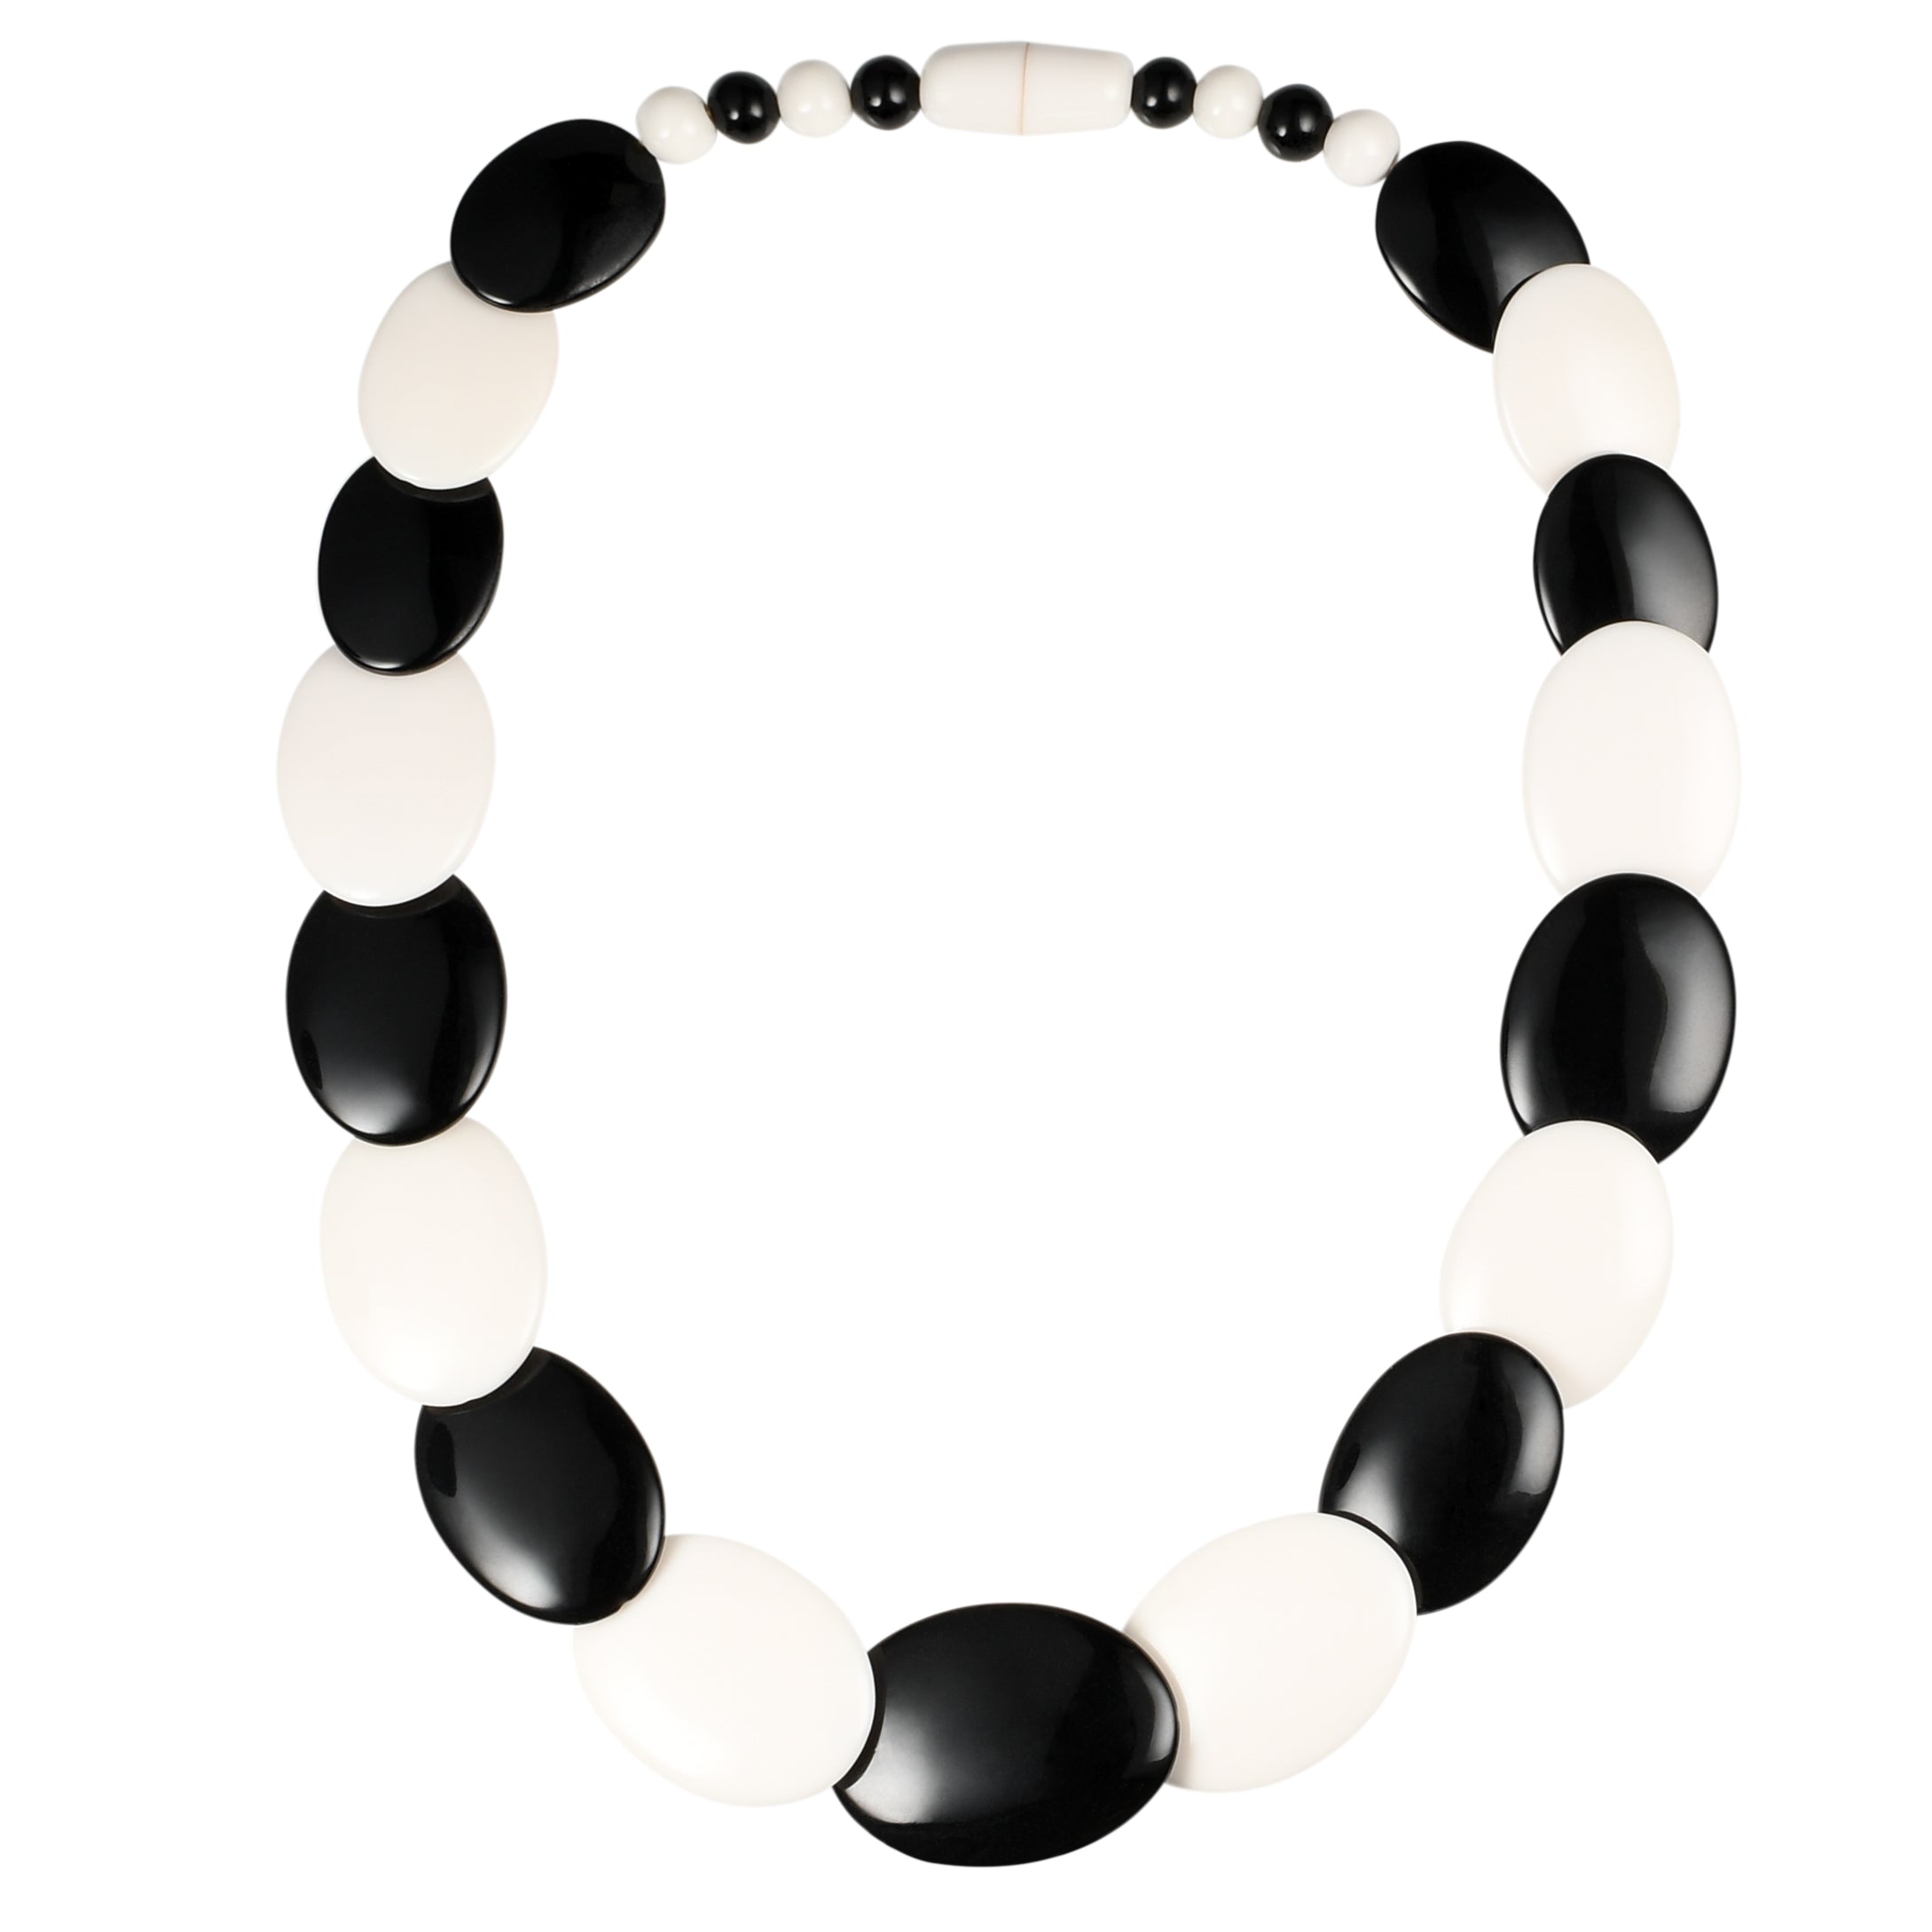  Black And White Statement Necklace